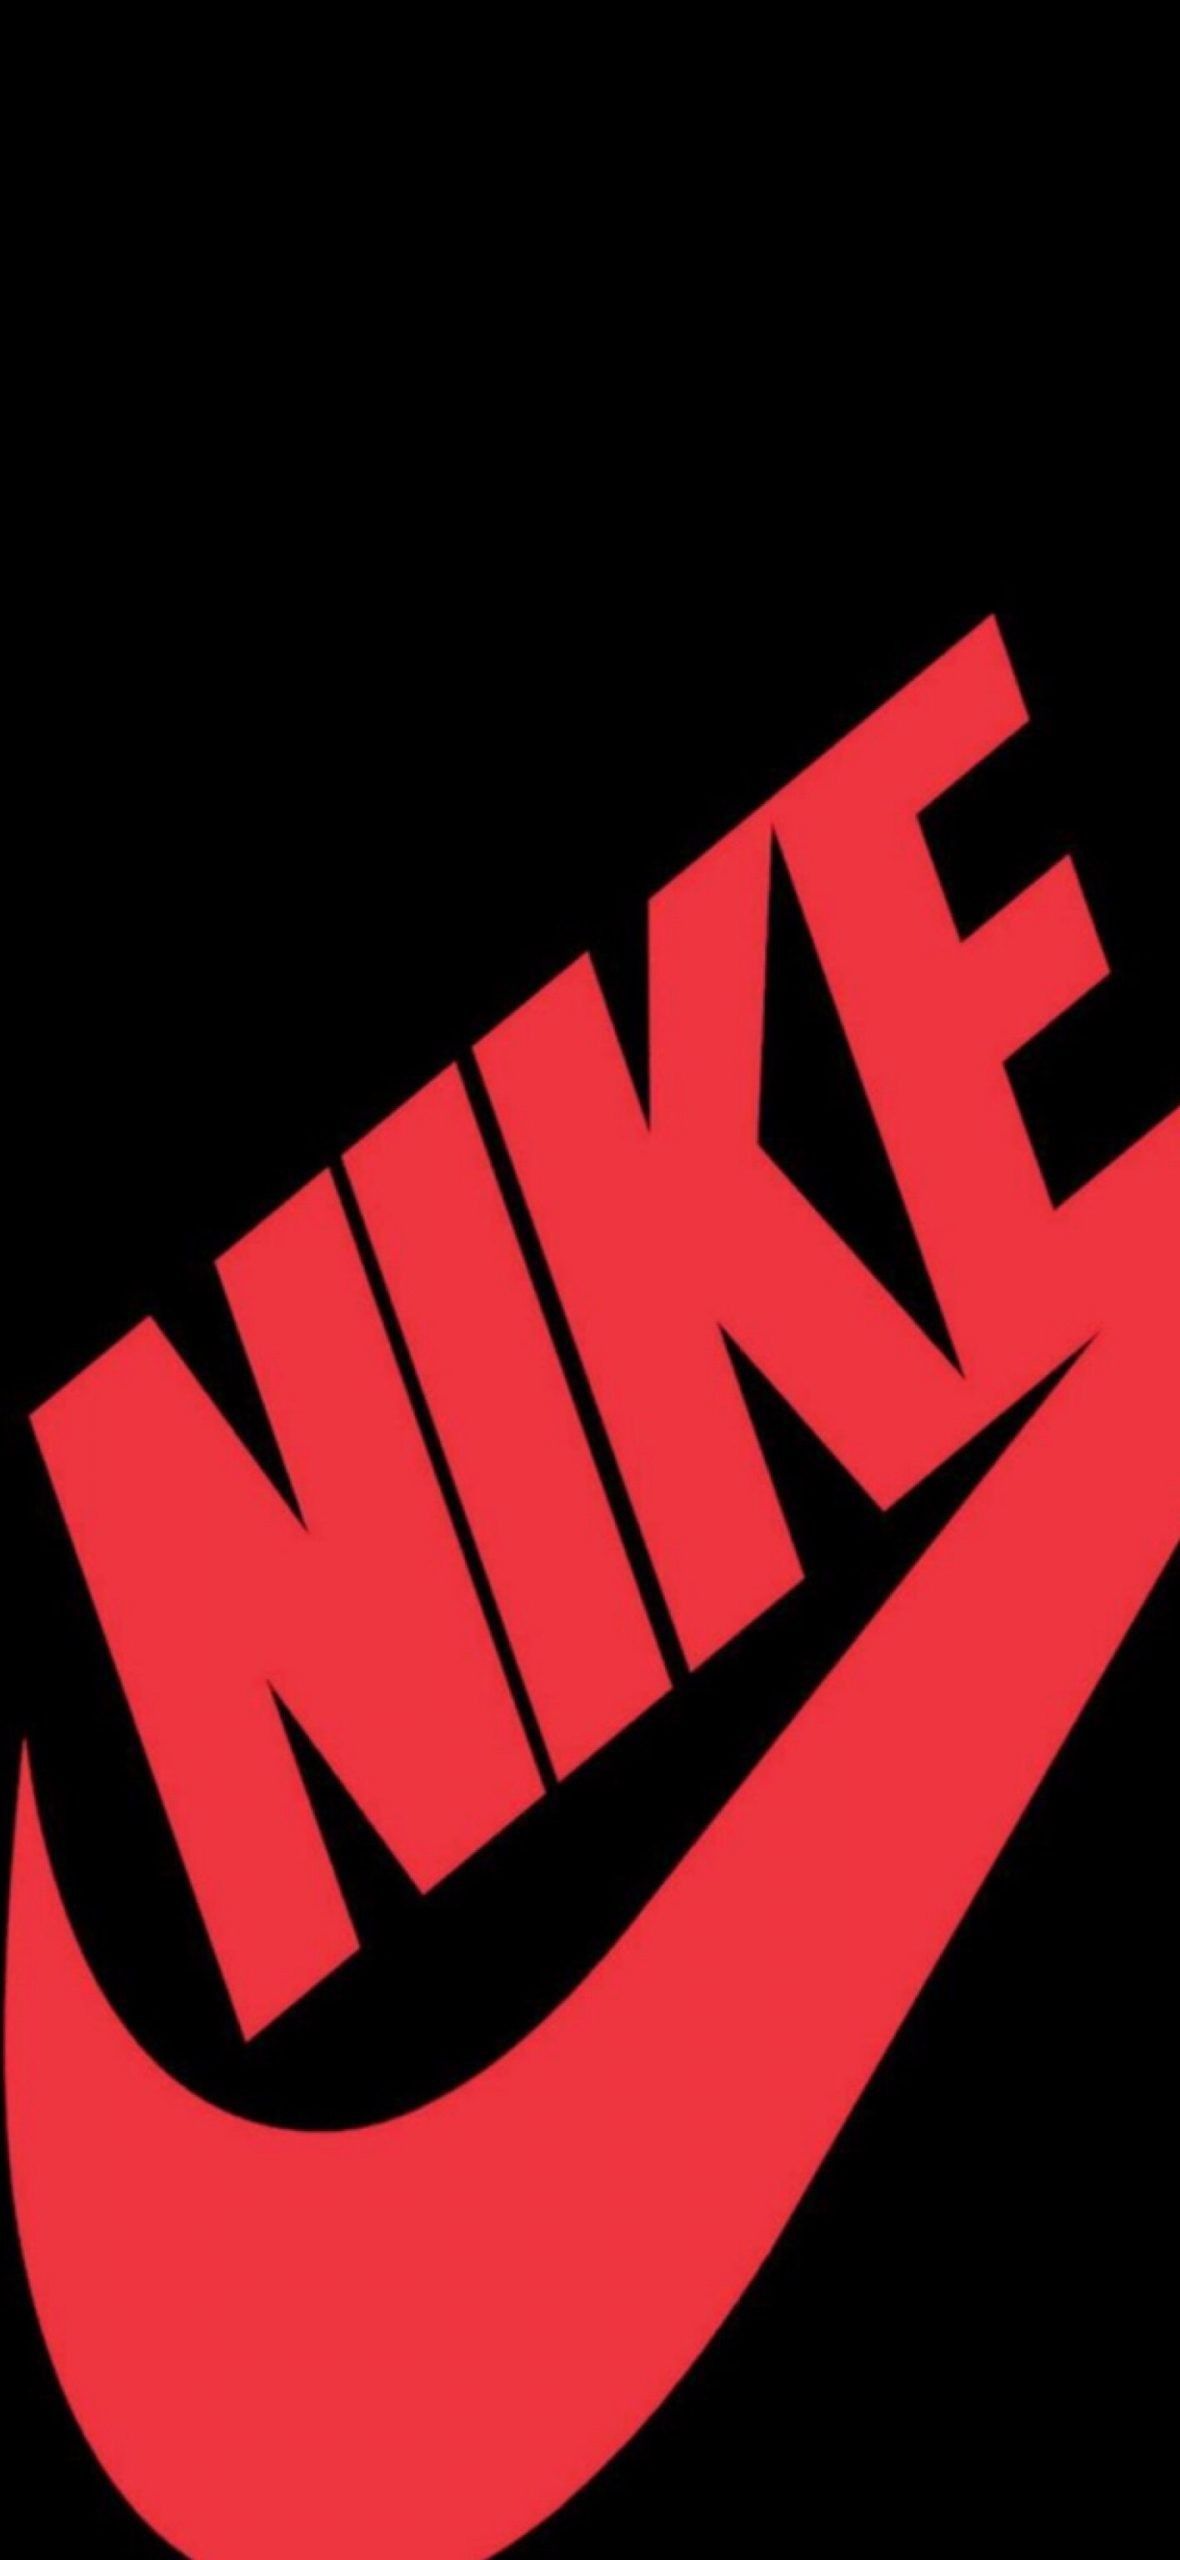 Nike wallpaper for iPhone 6 Plus resolution 1080x1920 - Nike